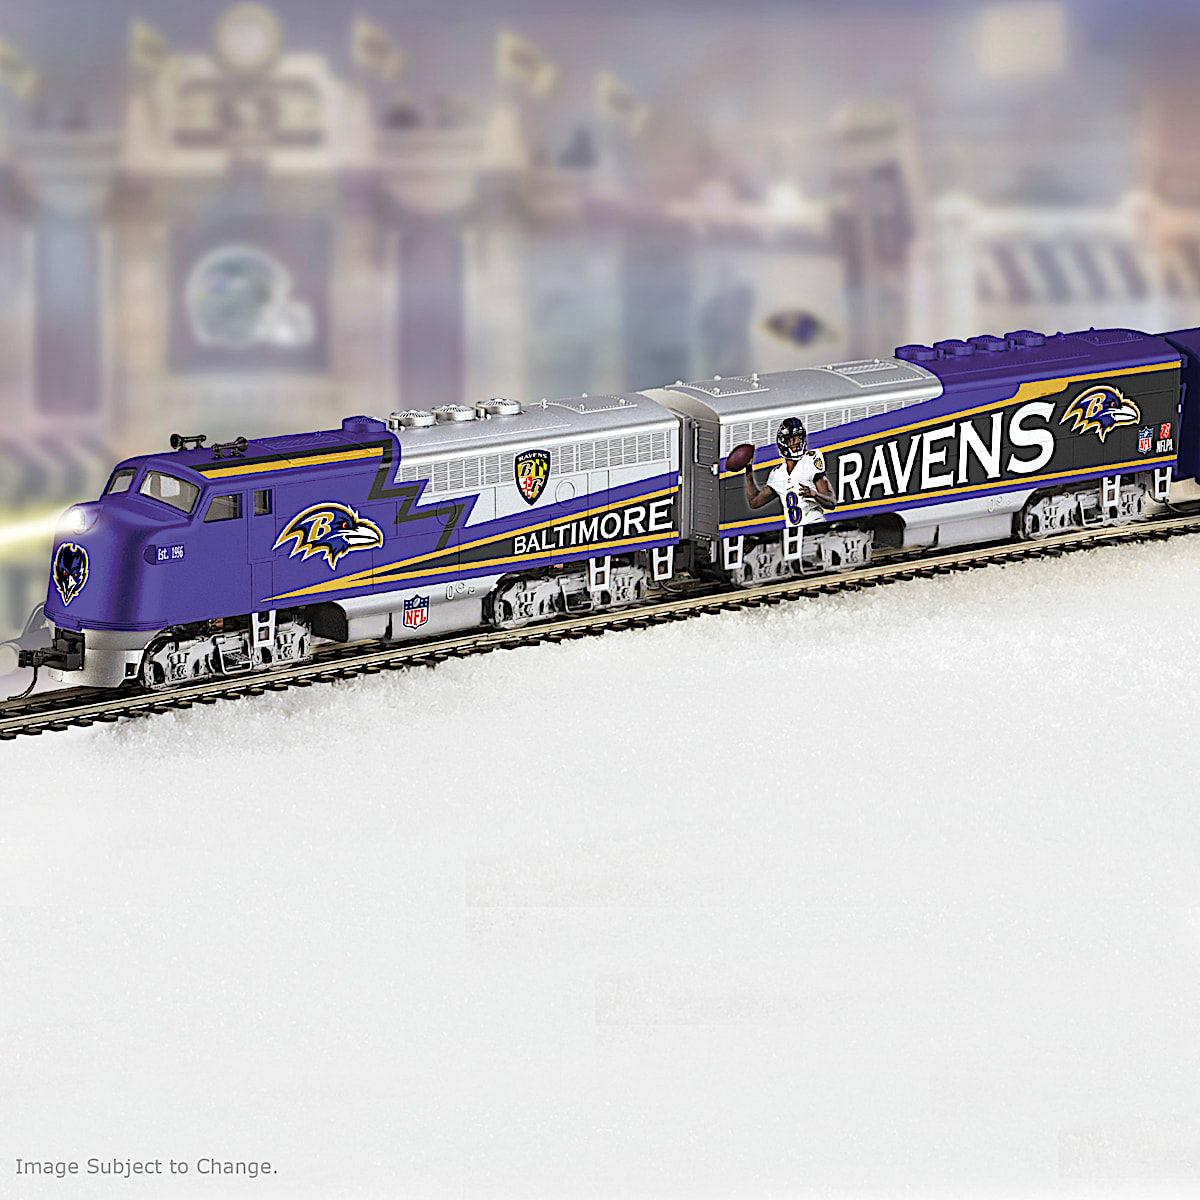 Baltimore Ravens Express NFL HOScale Electric Train Collection